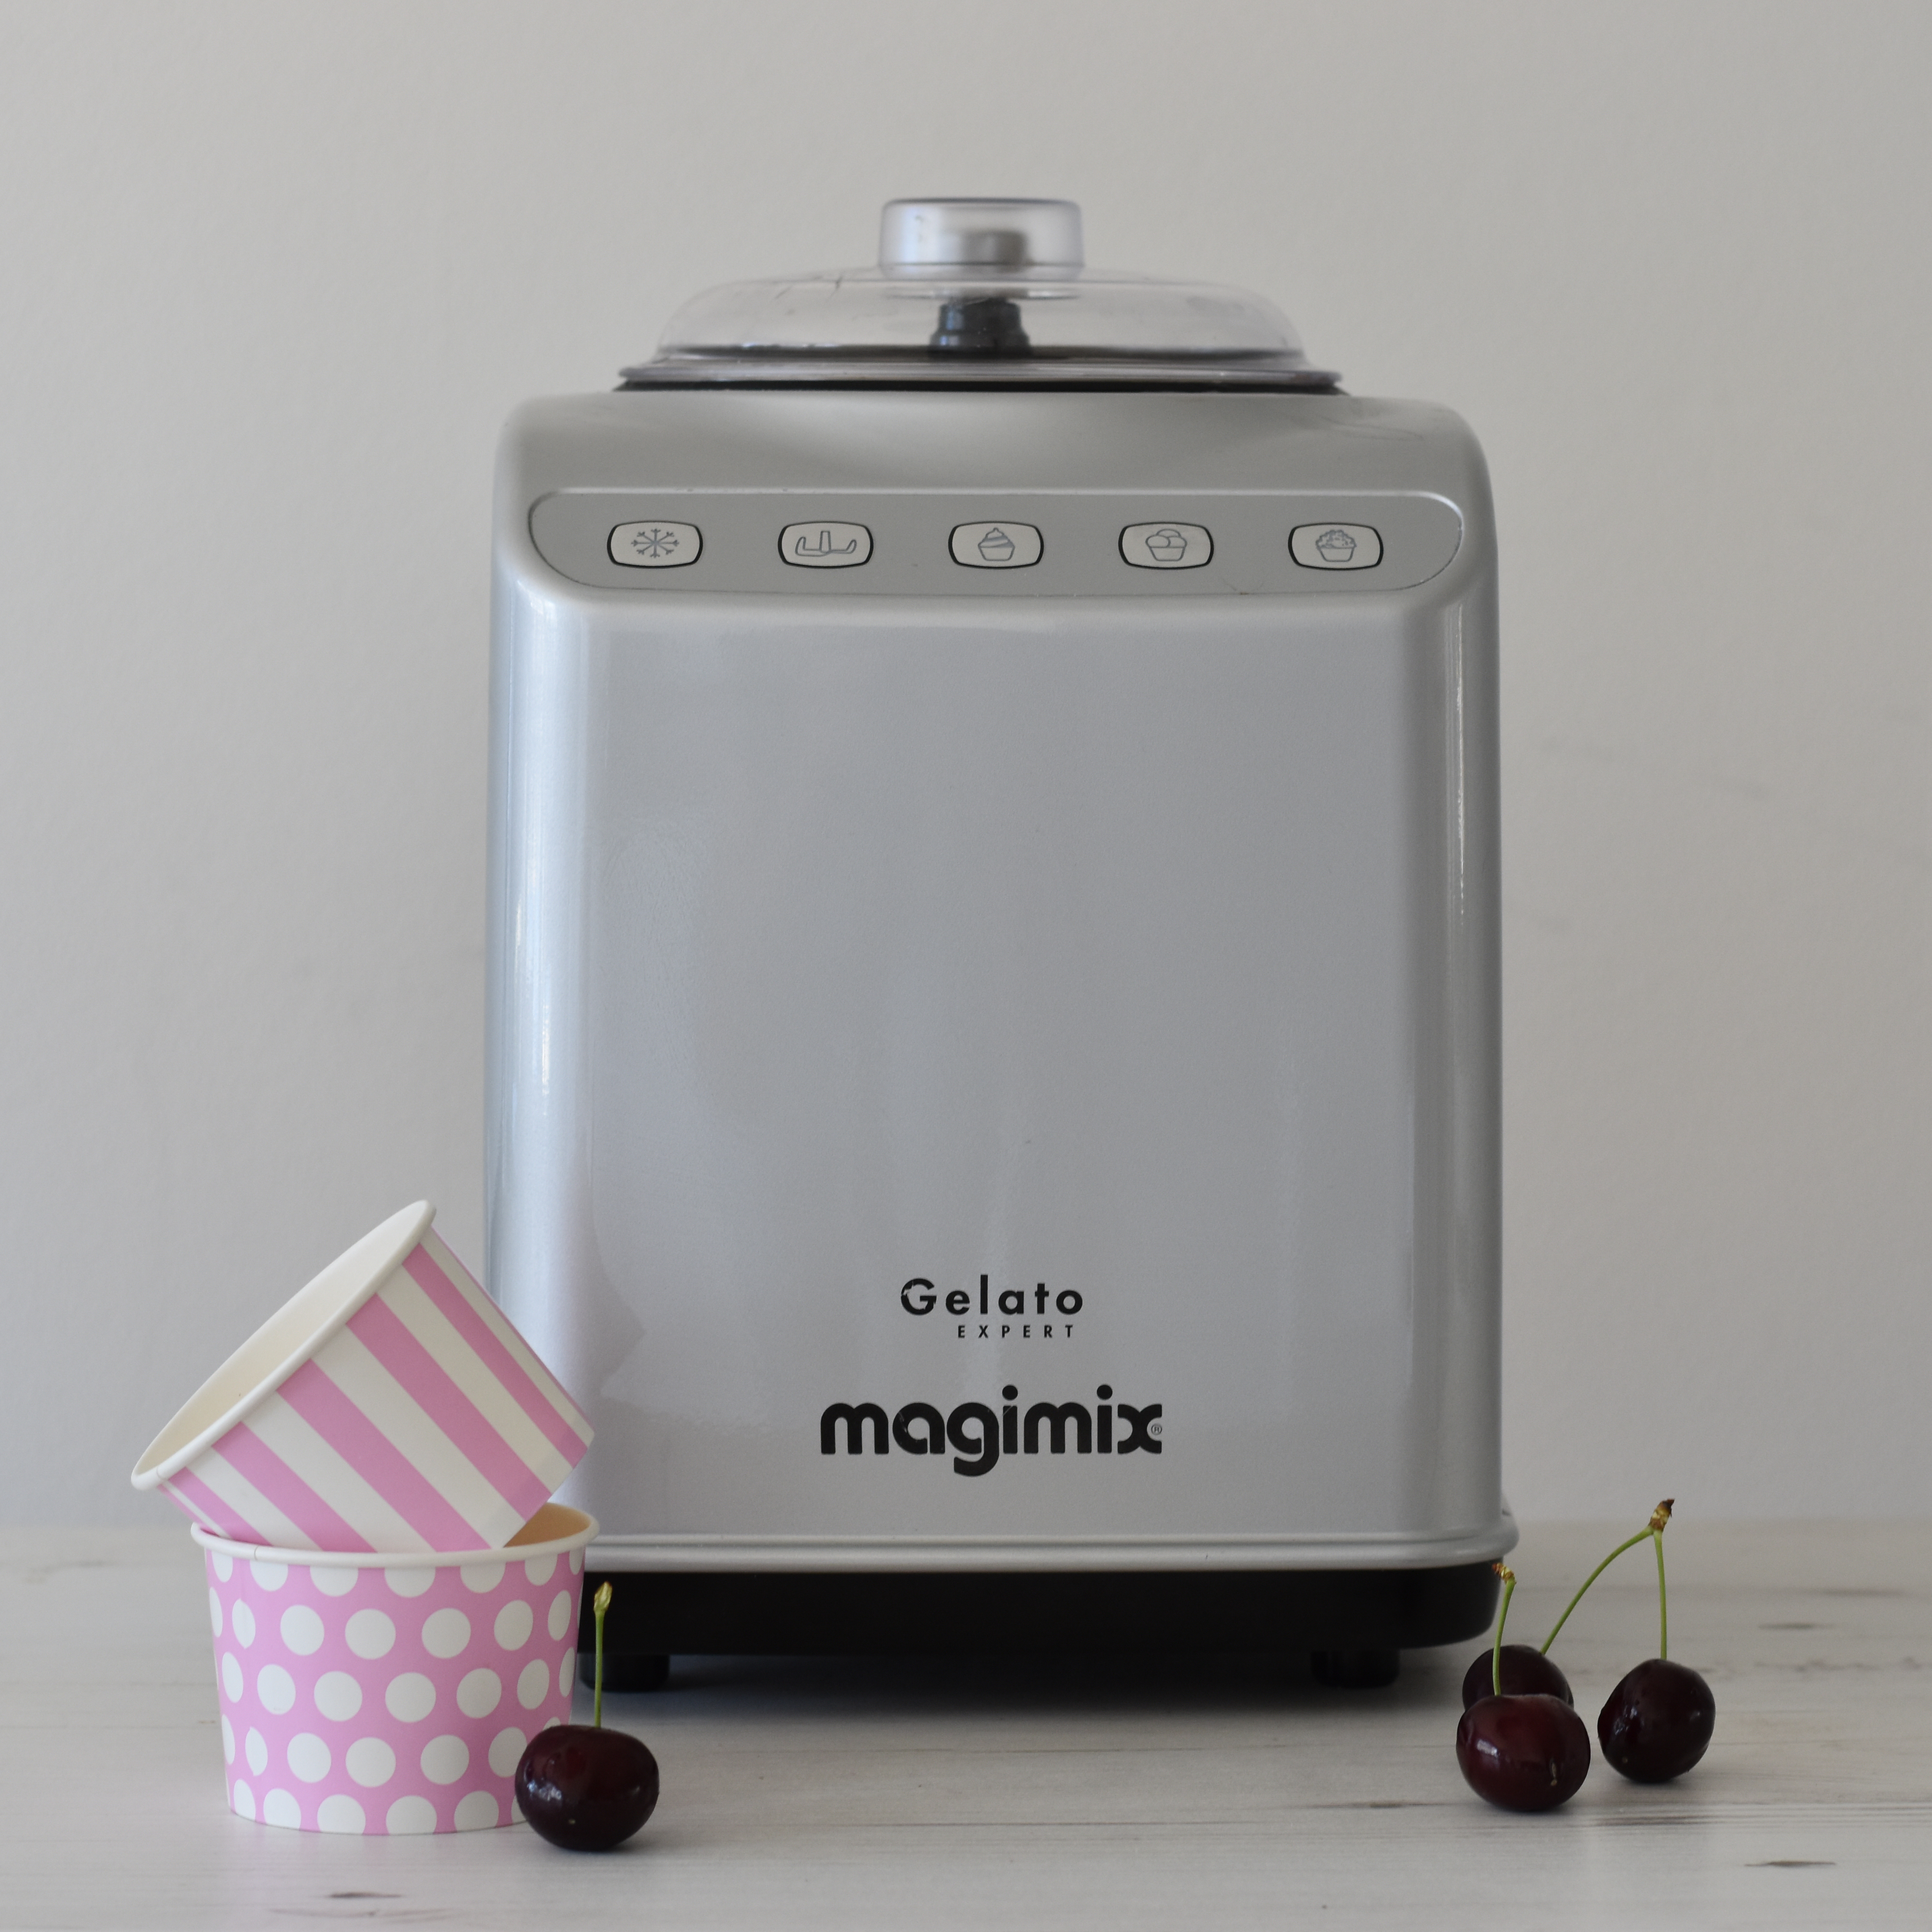 5 Recipes You Can Make with Just a Toaster - Magimix